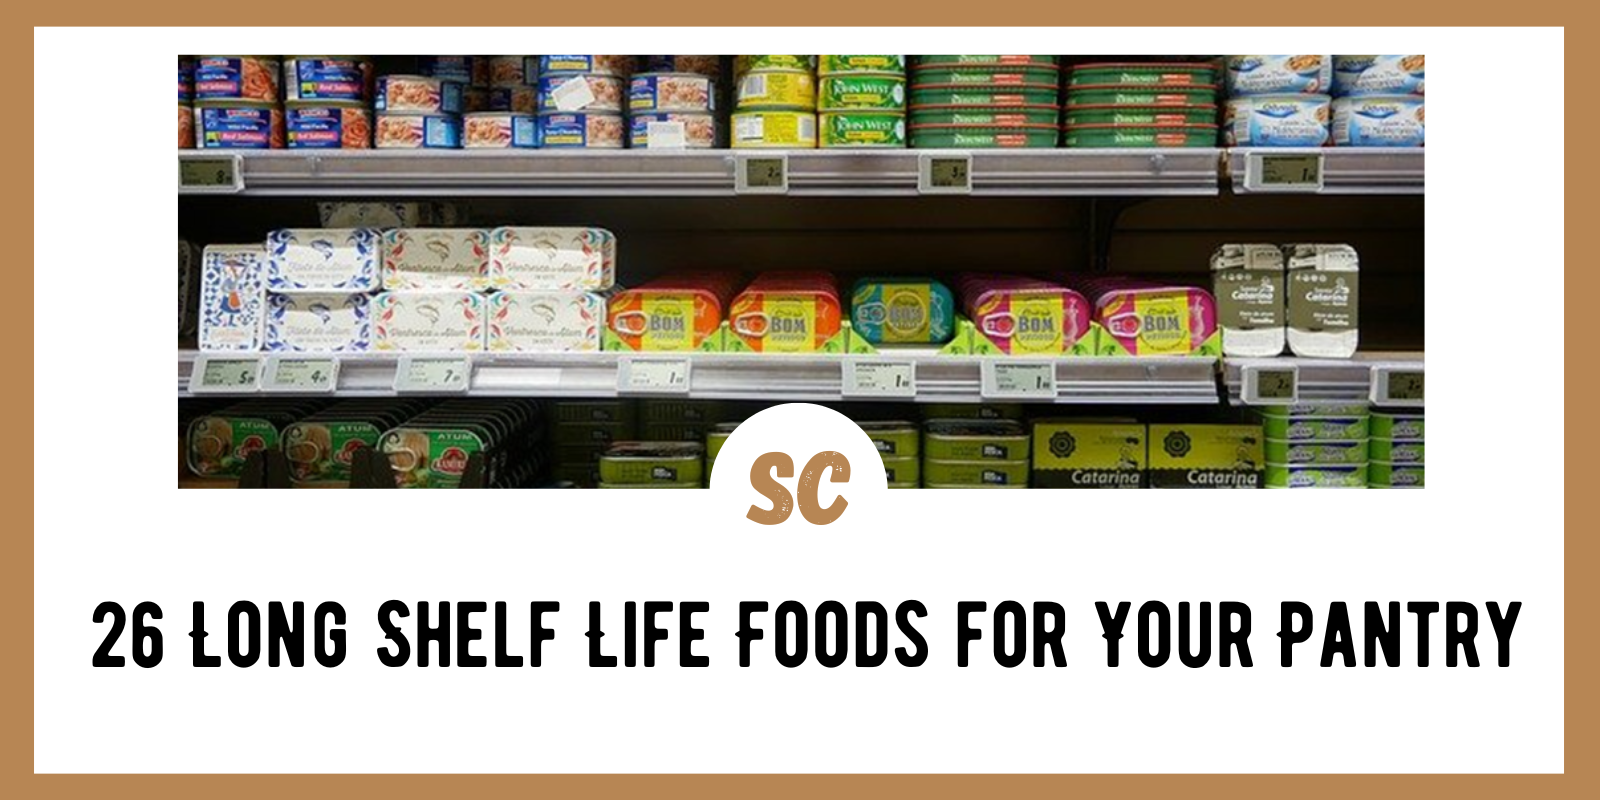 26 Long Shelf Life Foods for Your Pantry